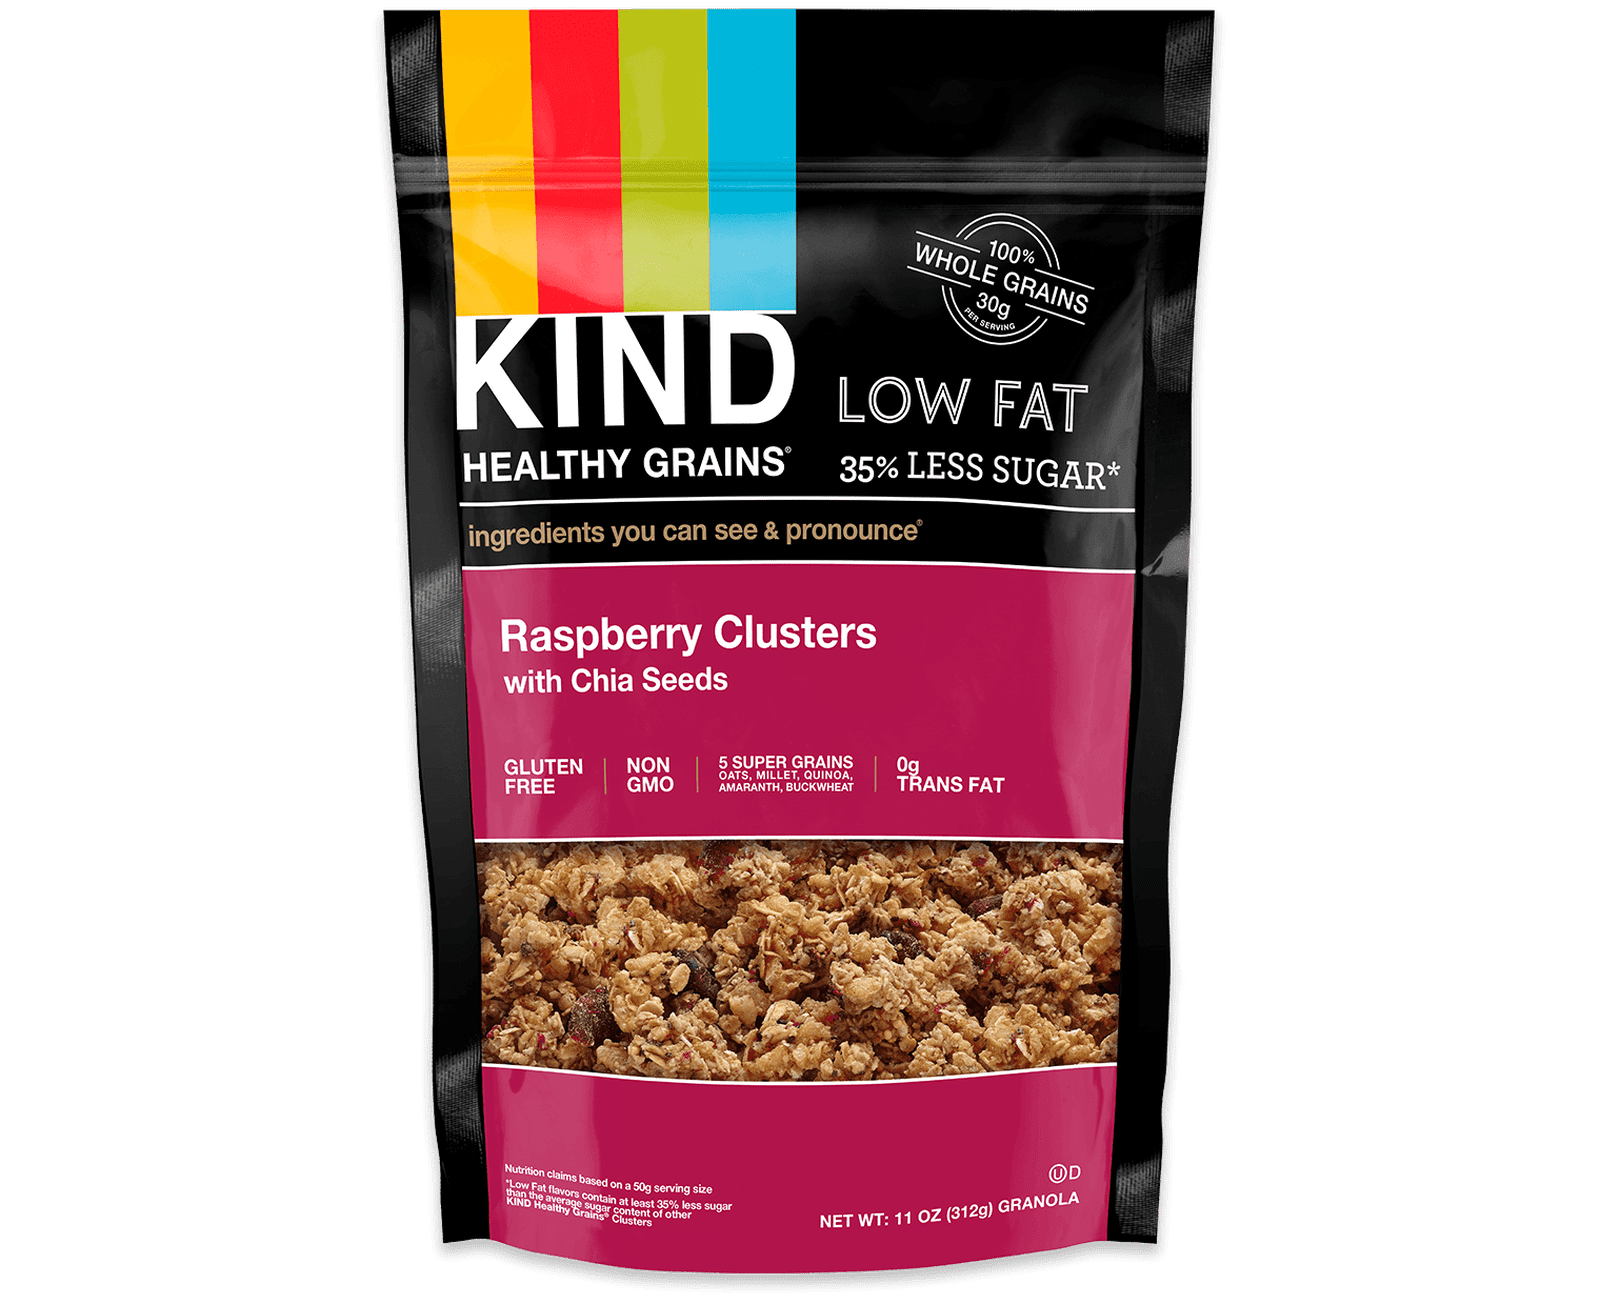 Photo 1 of 2pack---KIND Healthy Grains Granola Clusters, Raspberry with Chia Seeds, Gluten Free, 11 oz Resealable Bag  exp date10-2021